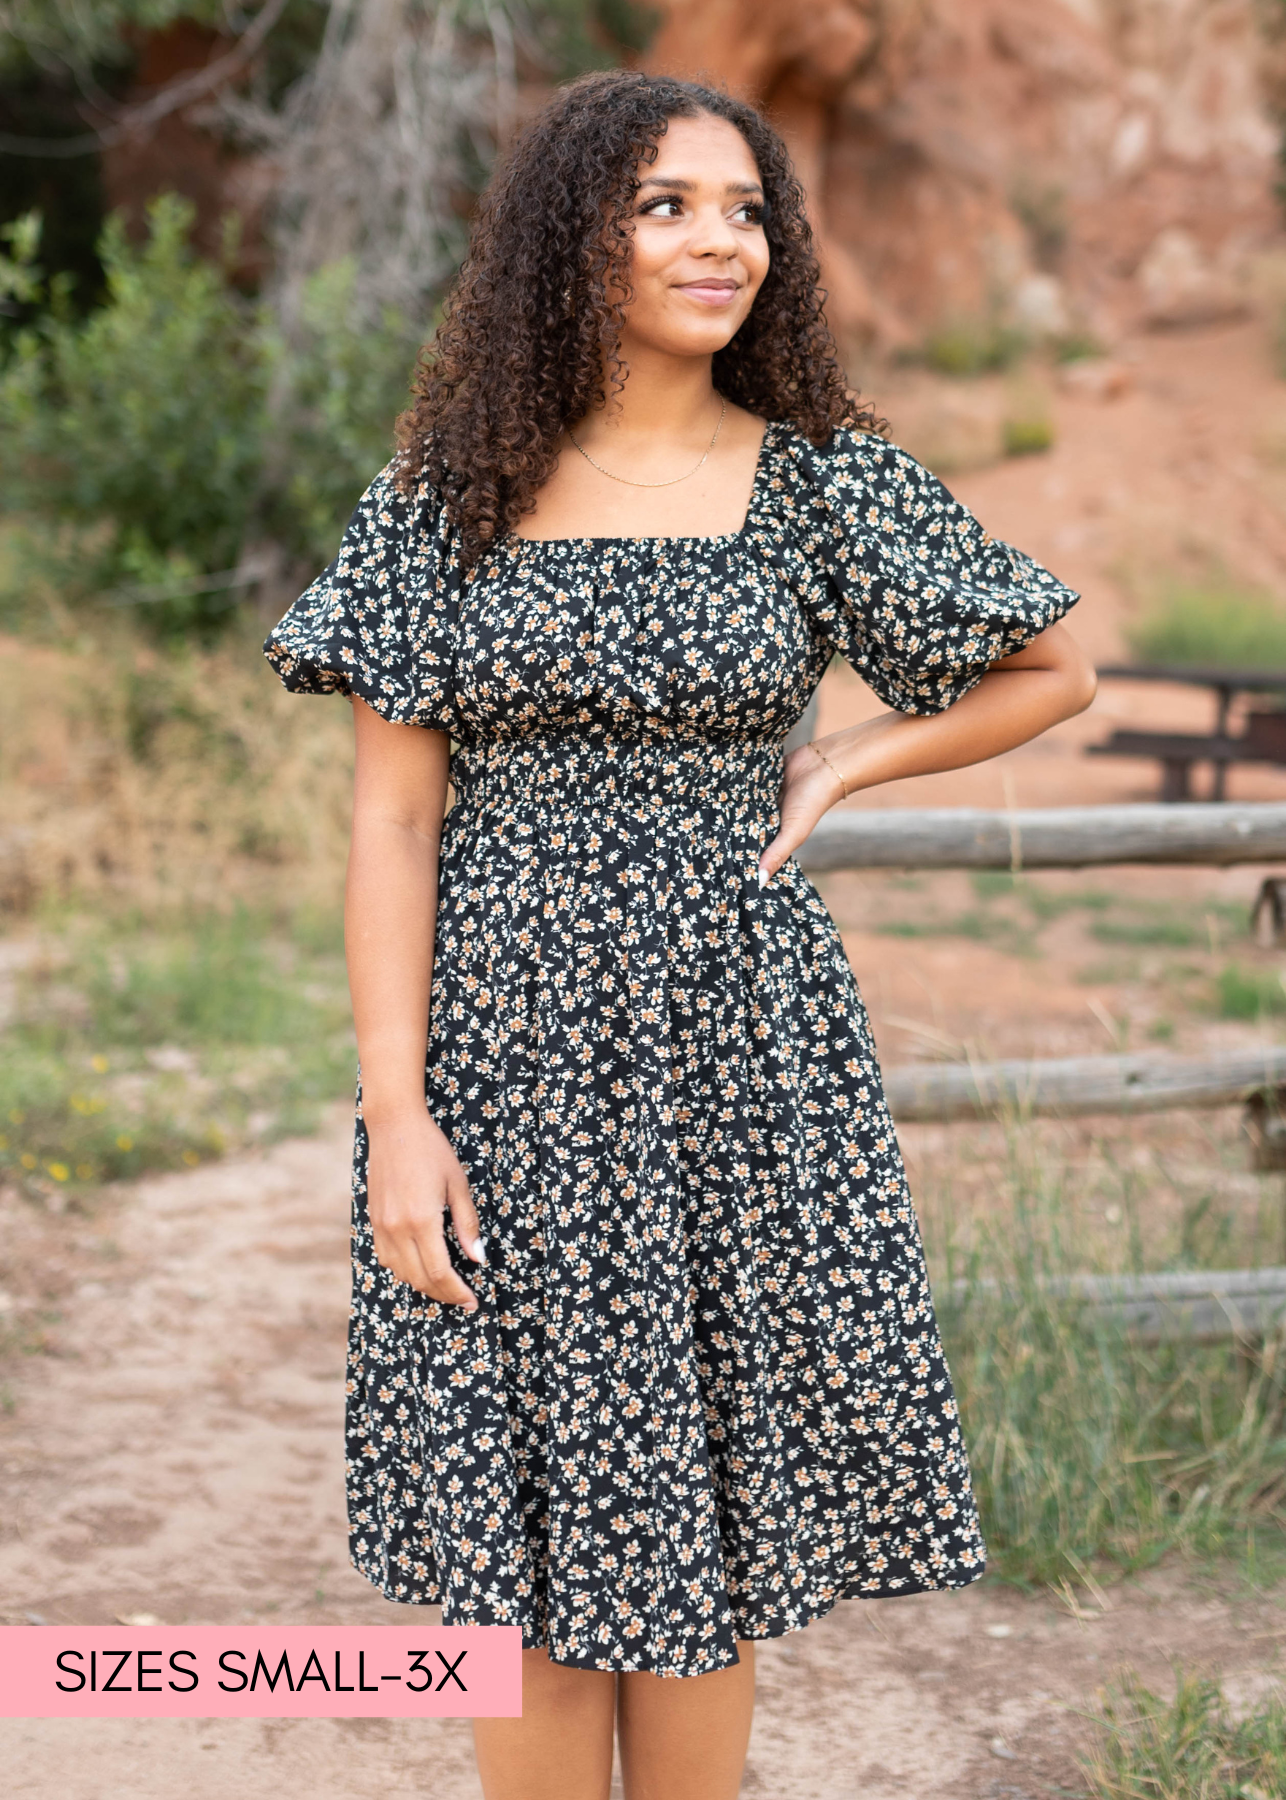 Short sleeve black floral dress with elastic waist and square neck